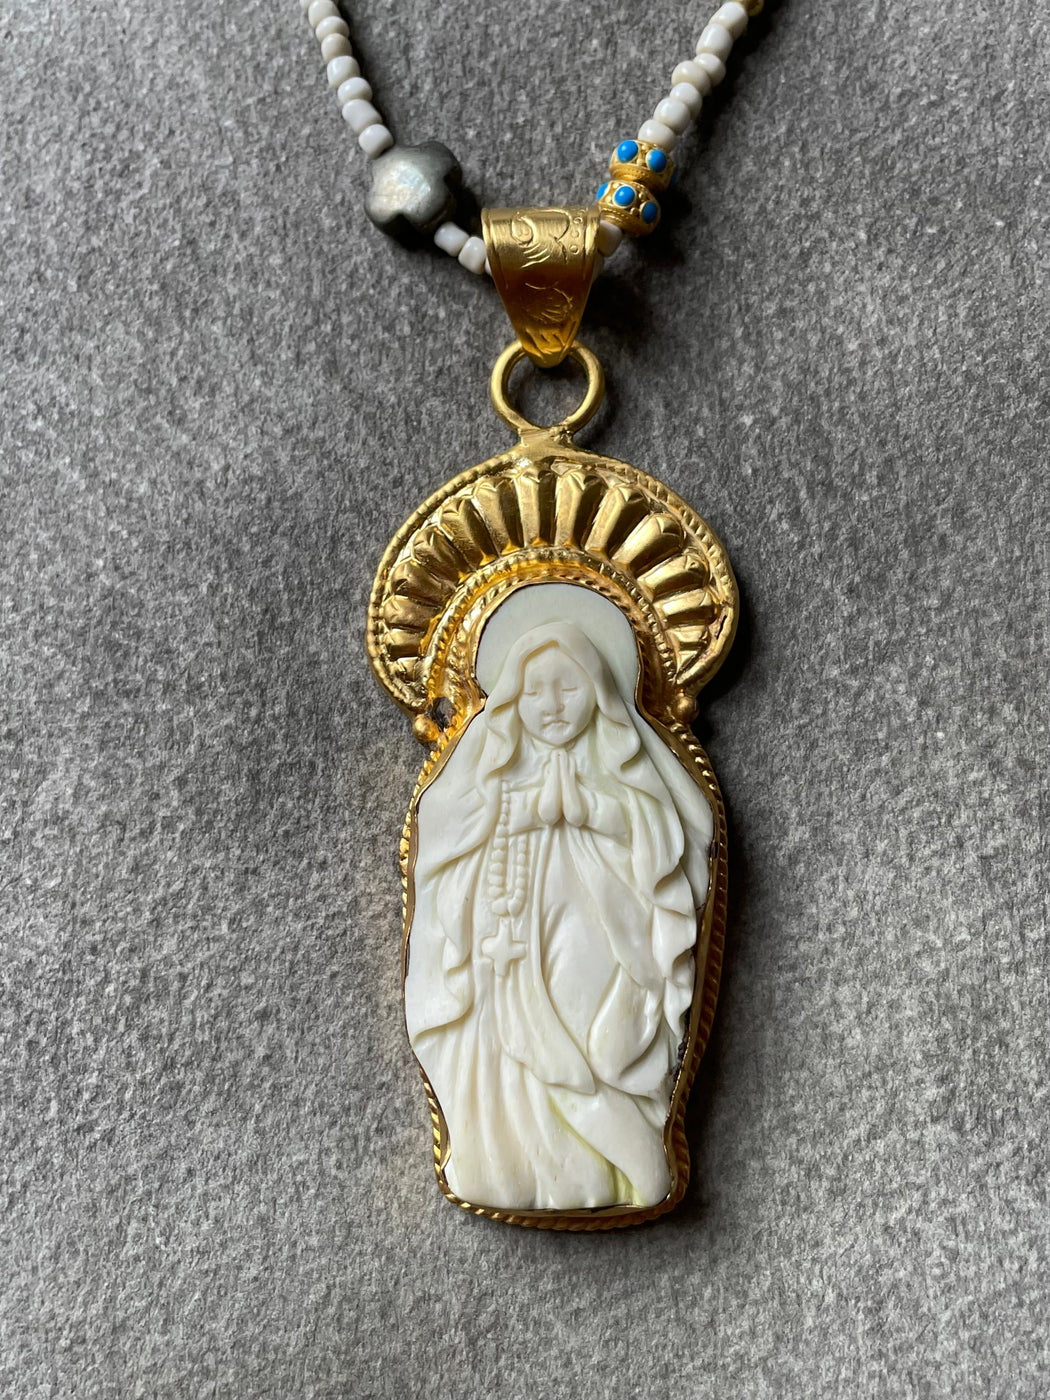 "Madonna" Necklace by Meredith Waterstraat